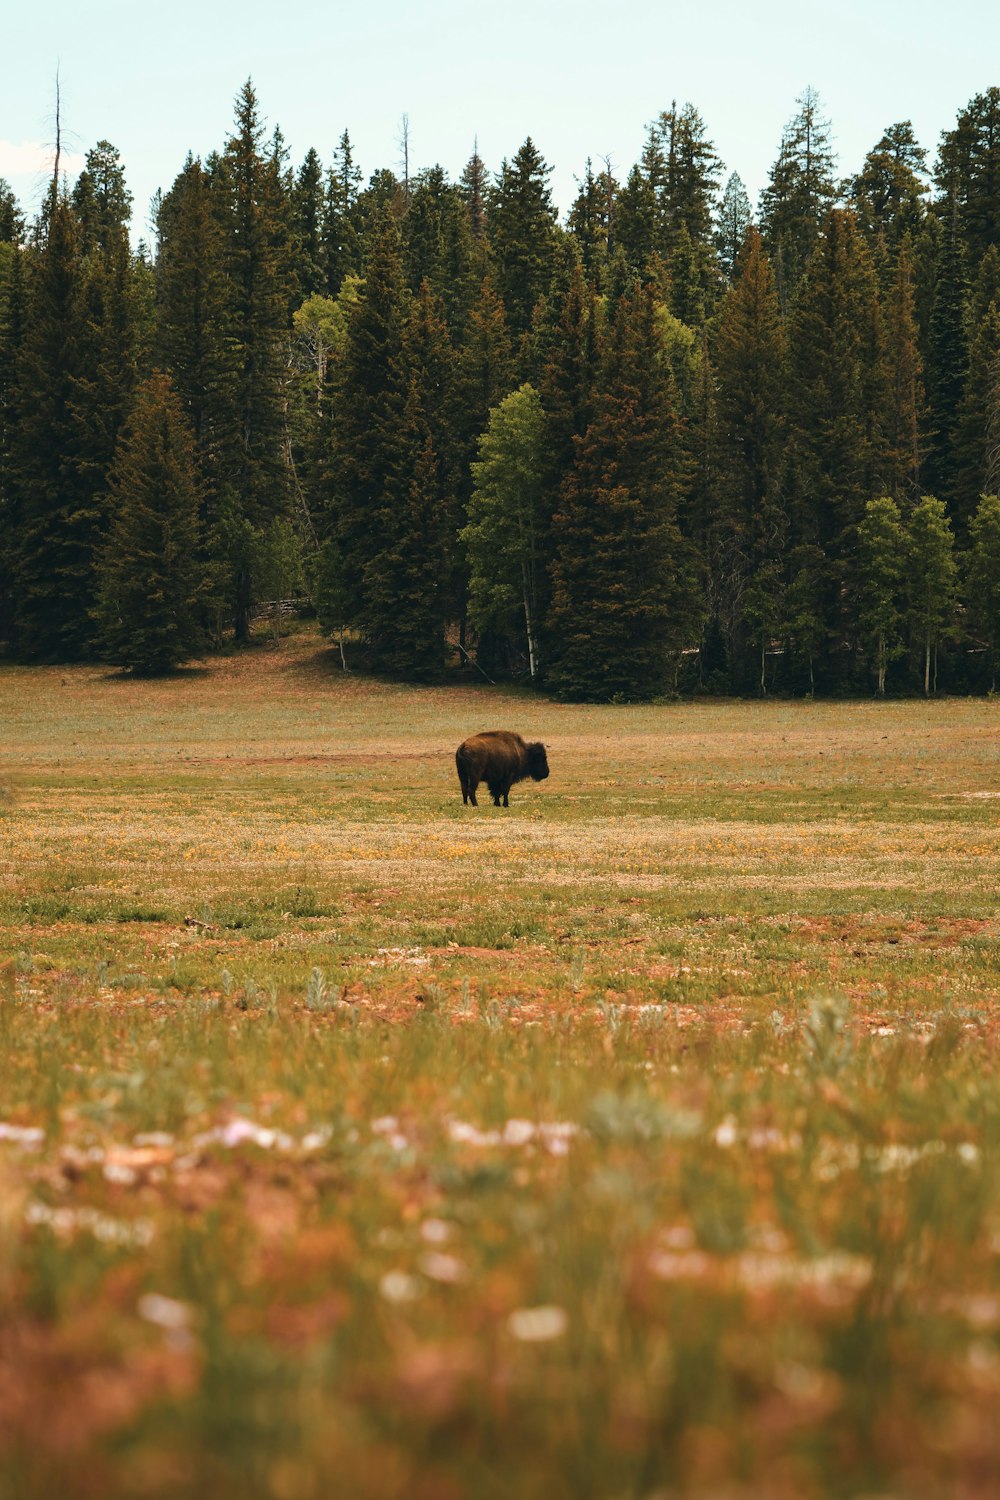 a bison standing in a field with trees in the background